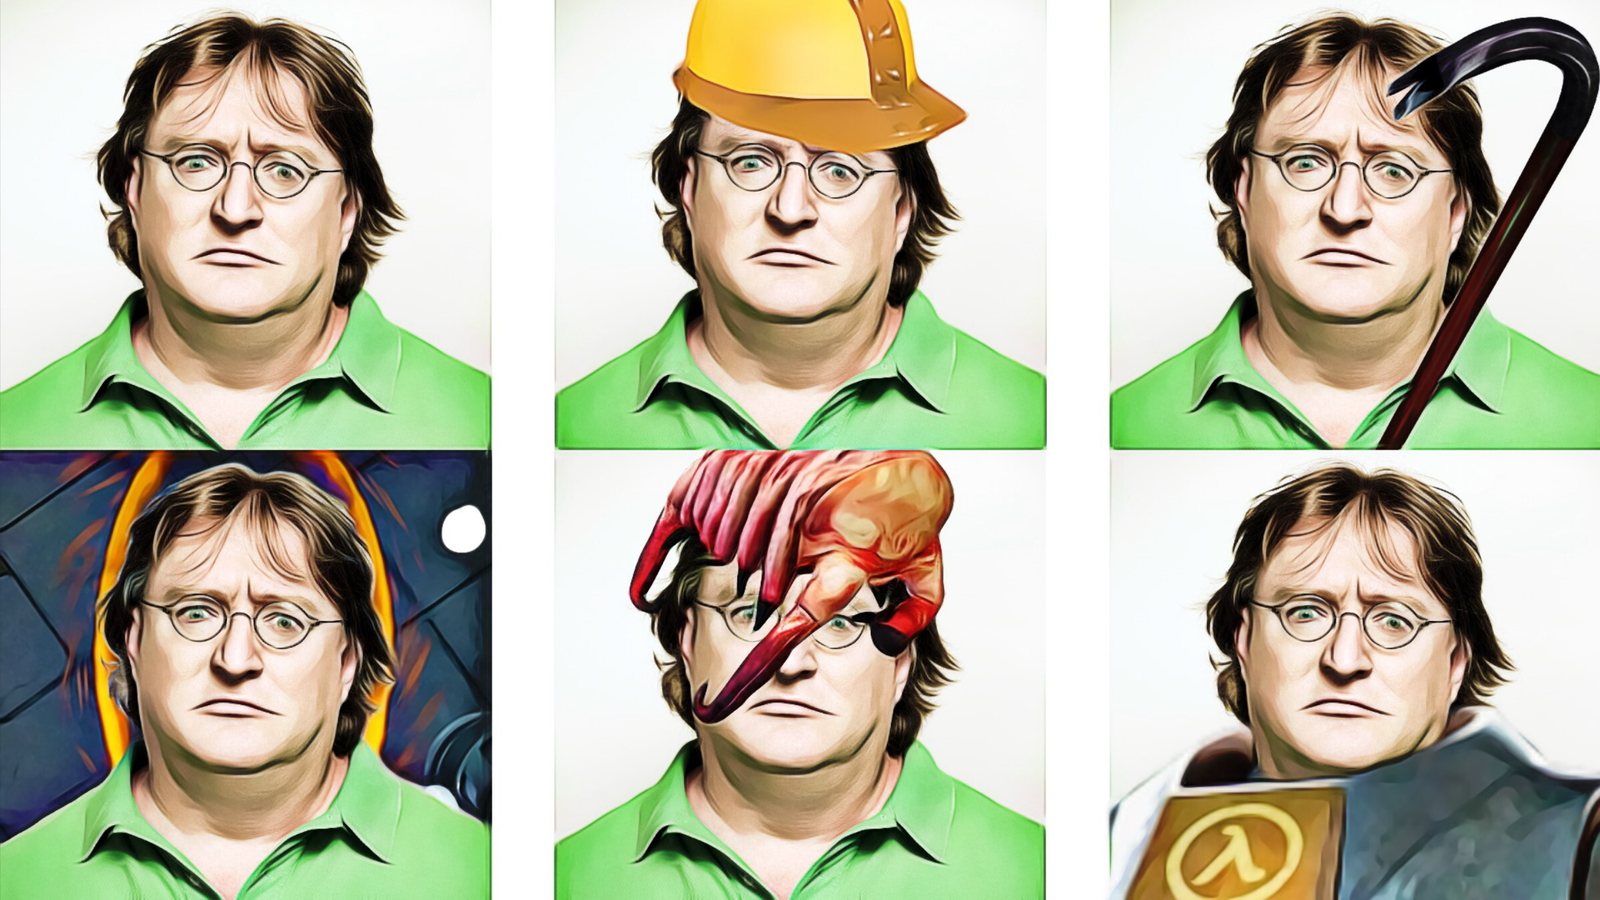 Gabe Newell: NFT actors “not people you want to be doing business with”